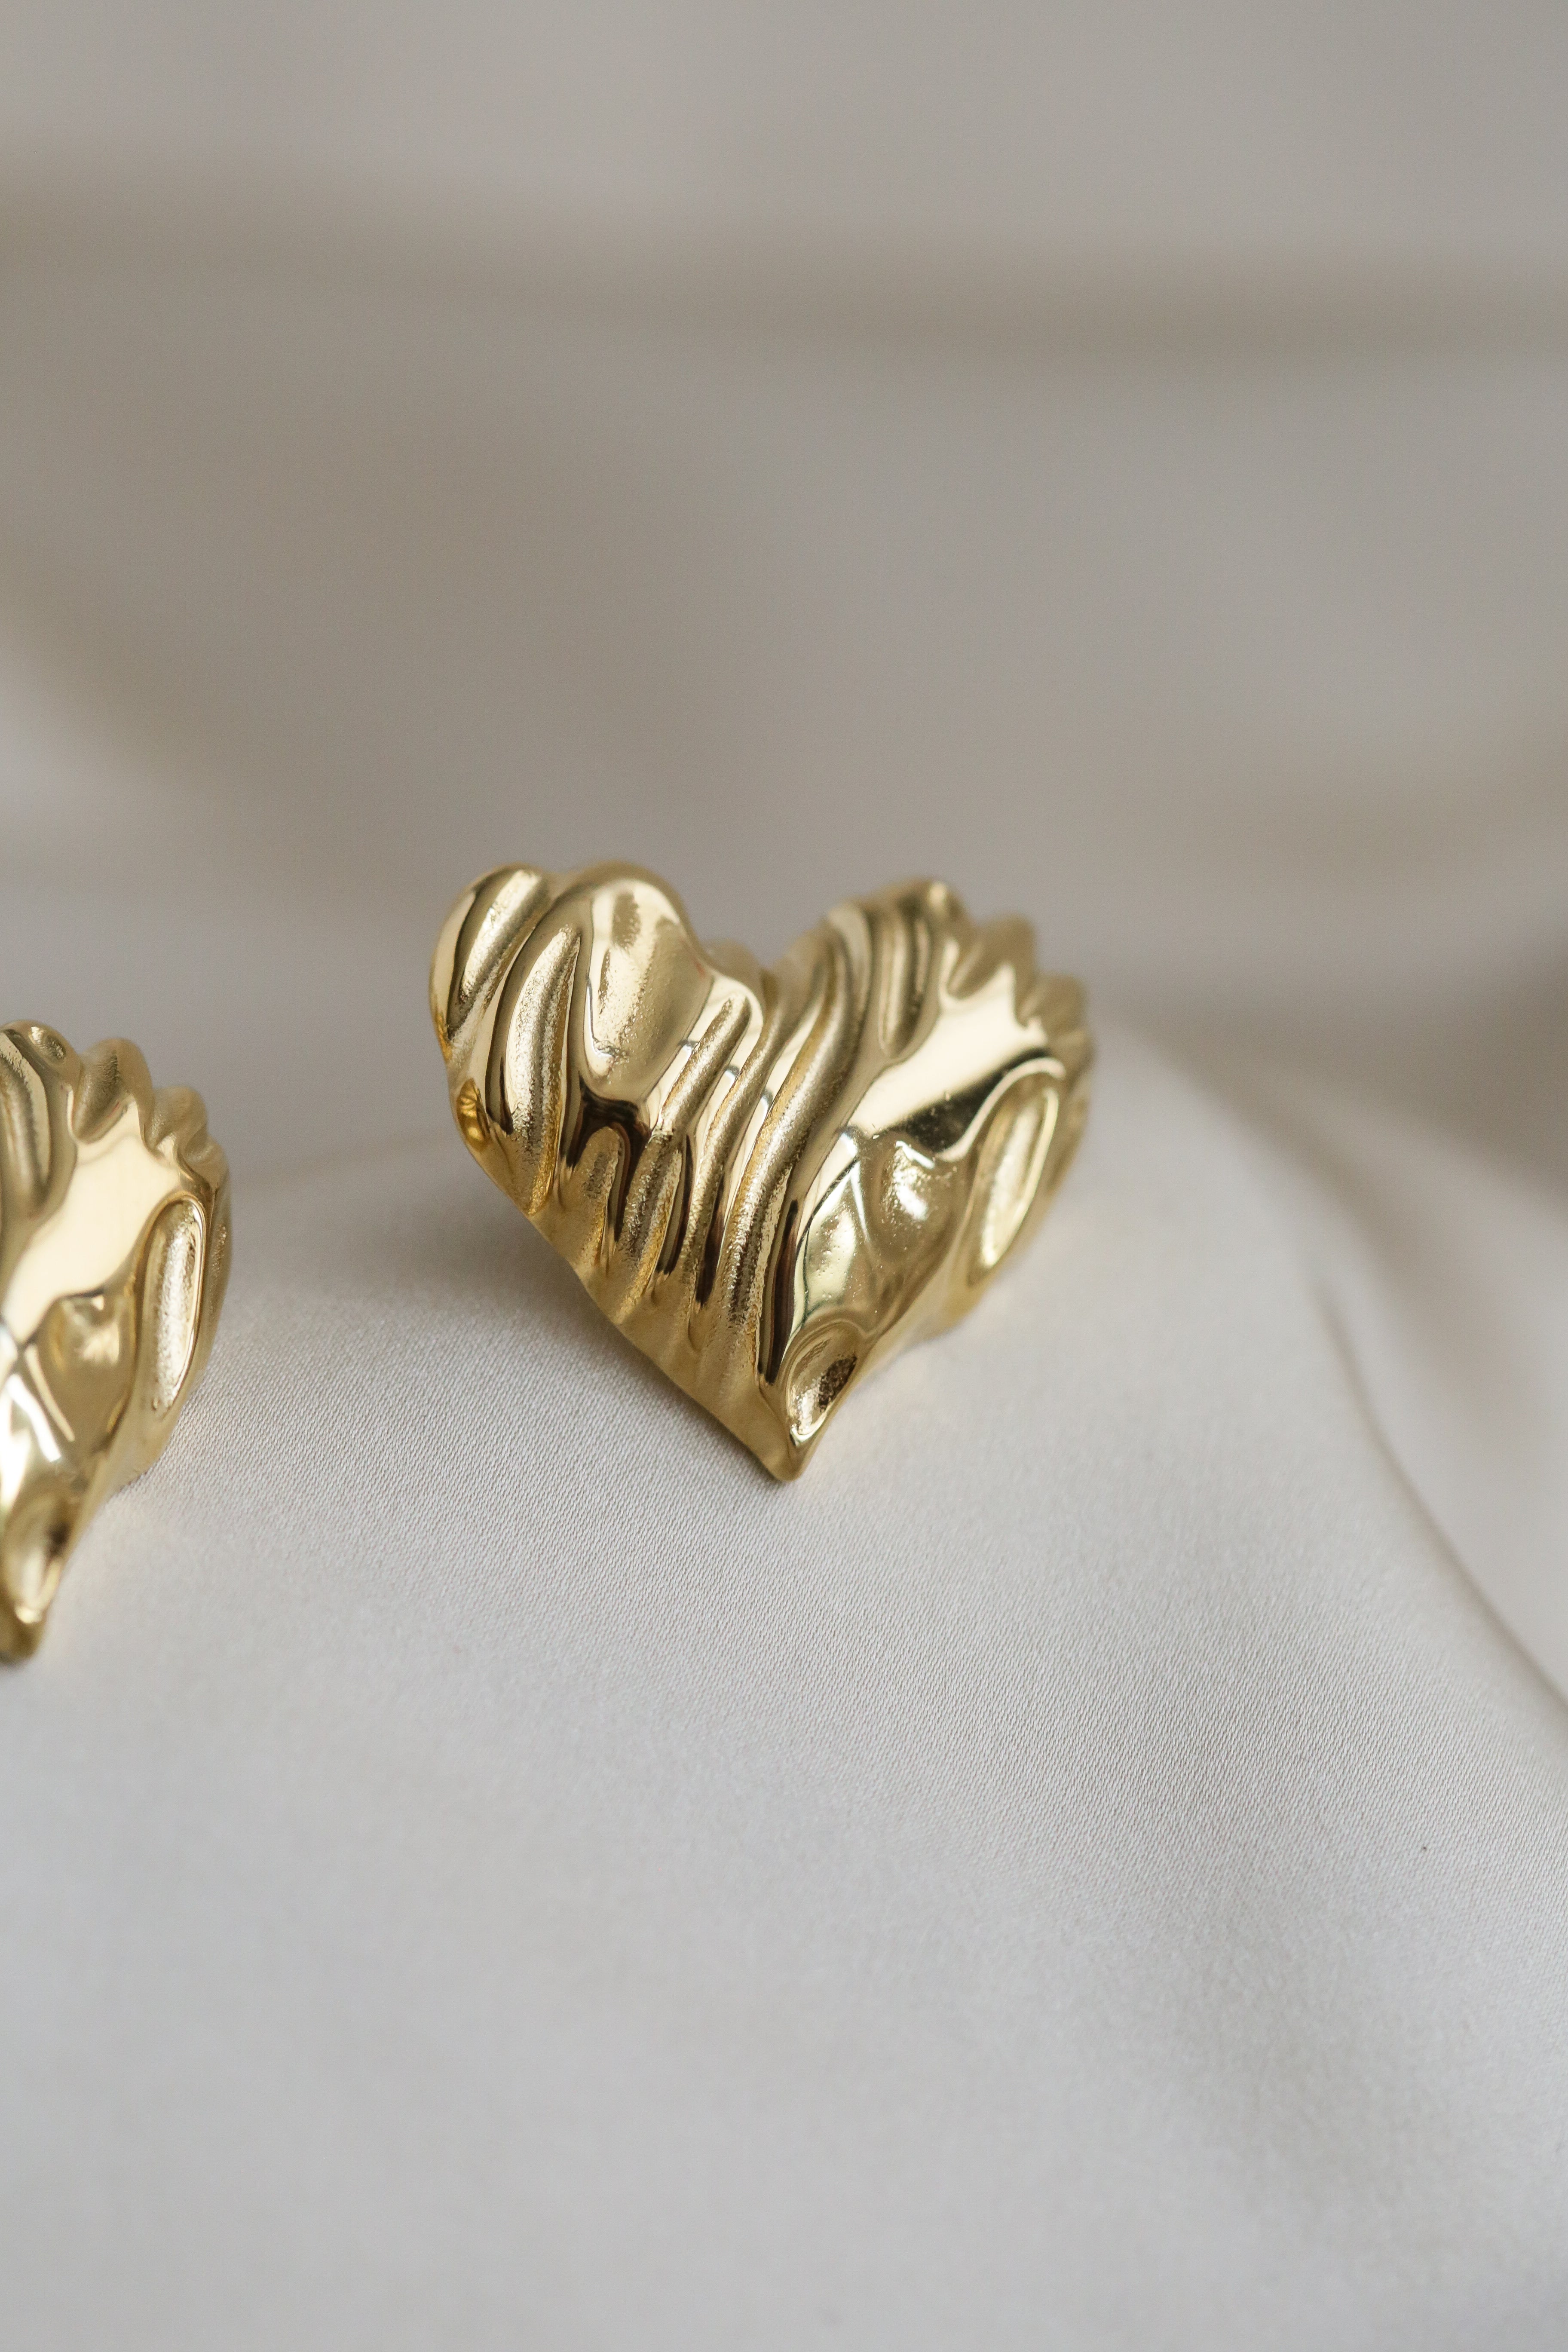 The Heart - Statement Earrings - Boutique Minimaliste has waterproof, durable, elegant and vintage inspired jewelry